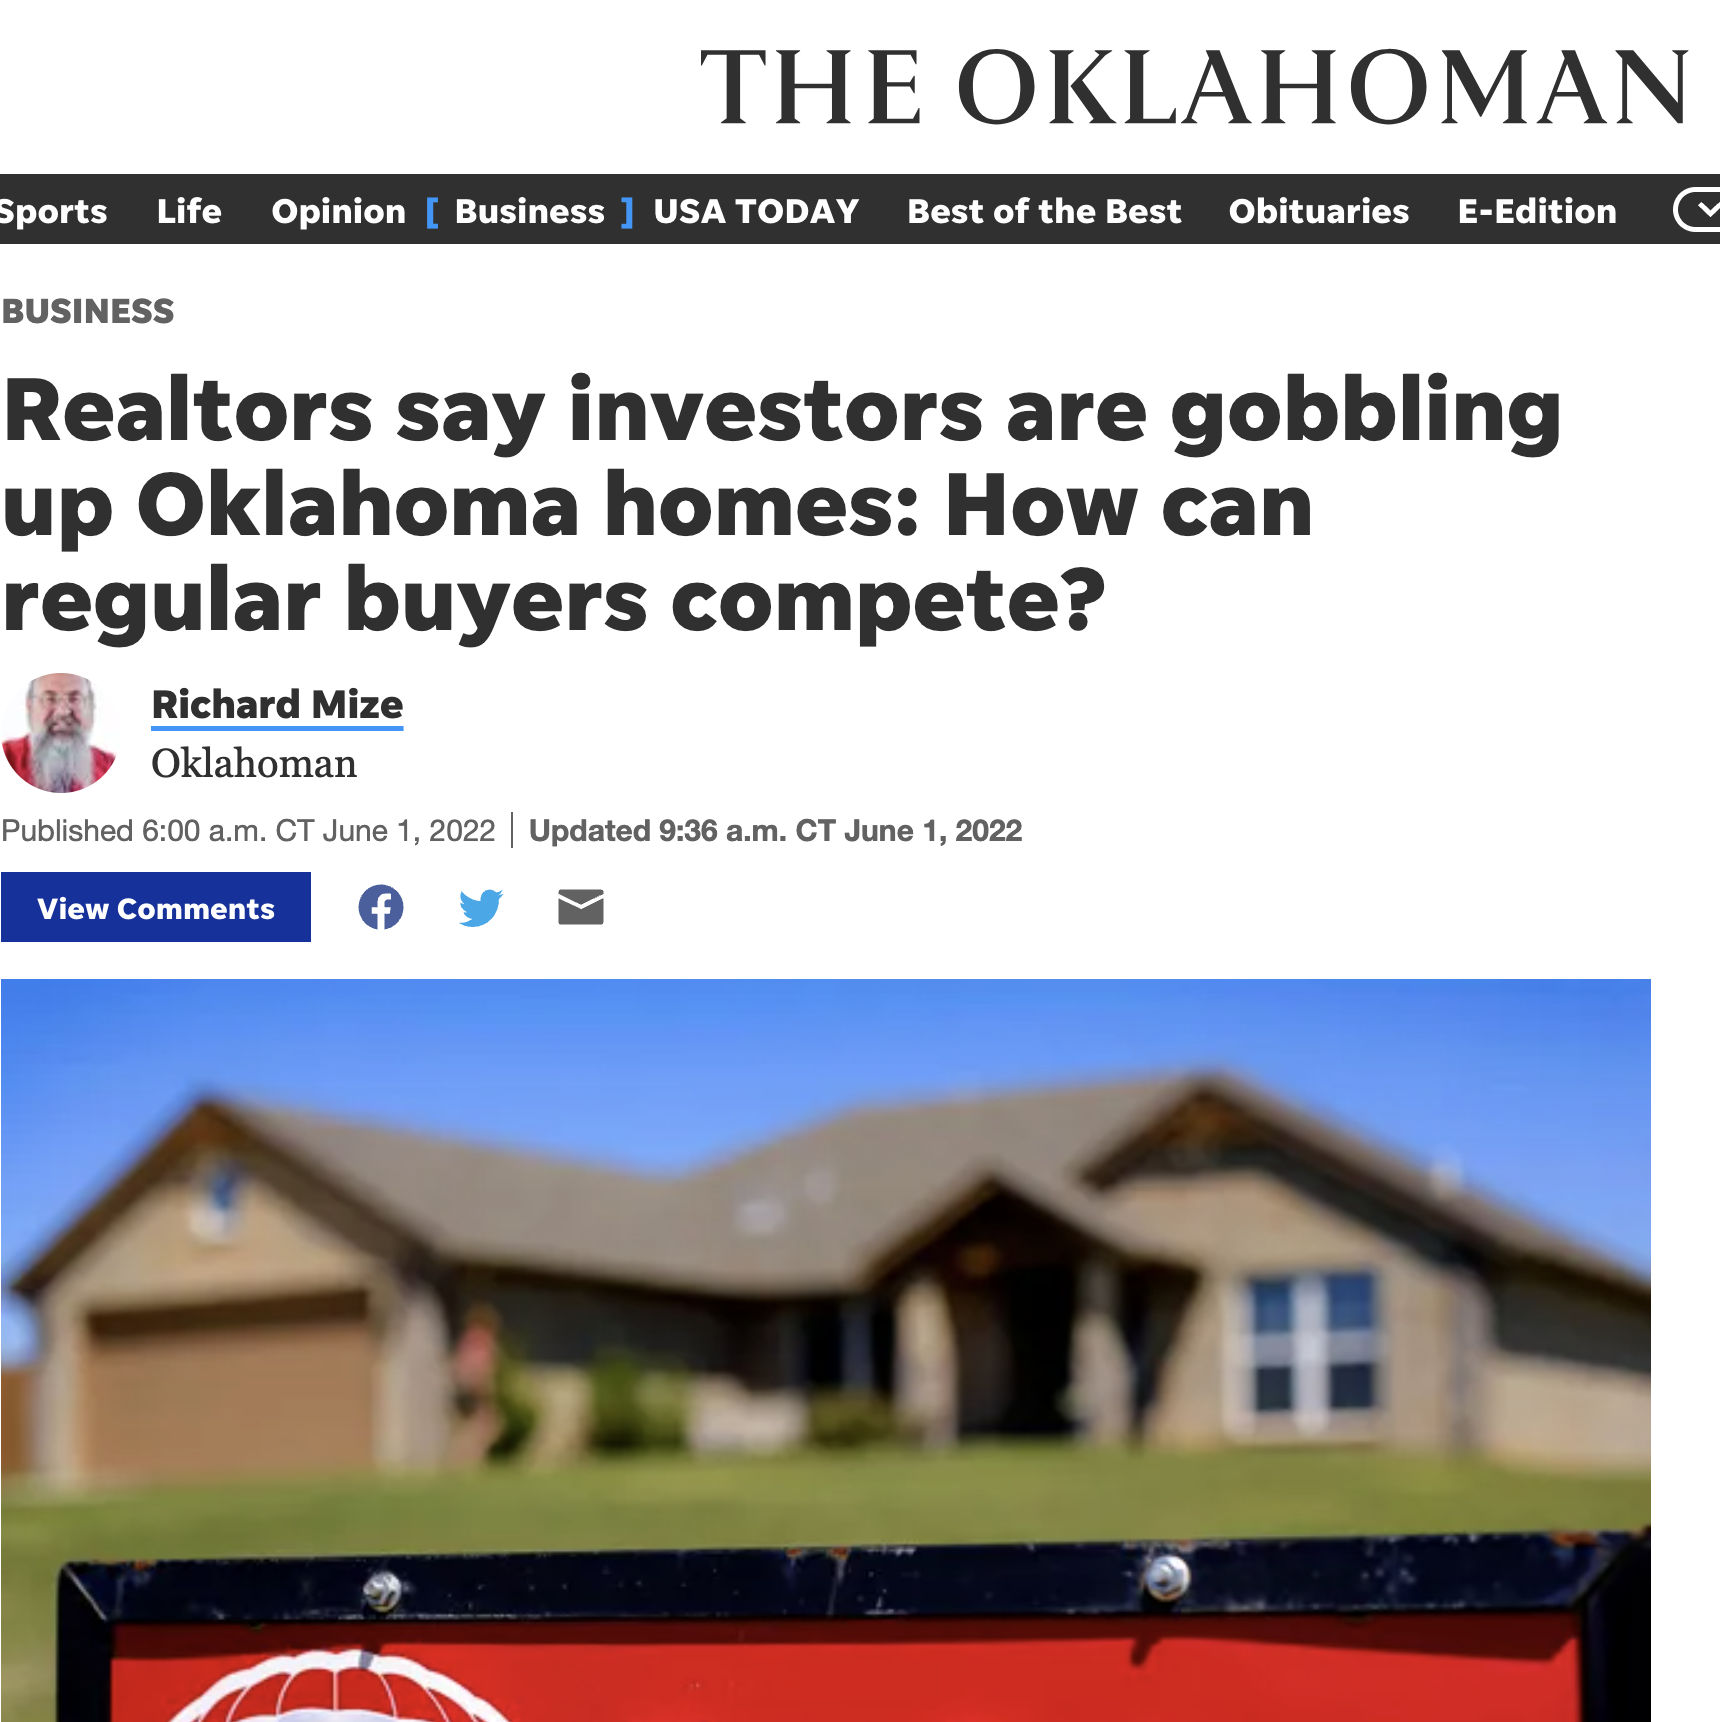 Realtors say investors are gobbling up Oklahoma homes: How can regular buyers compete?